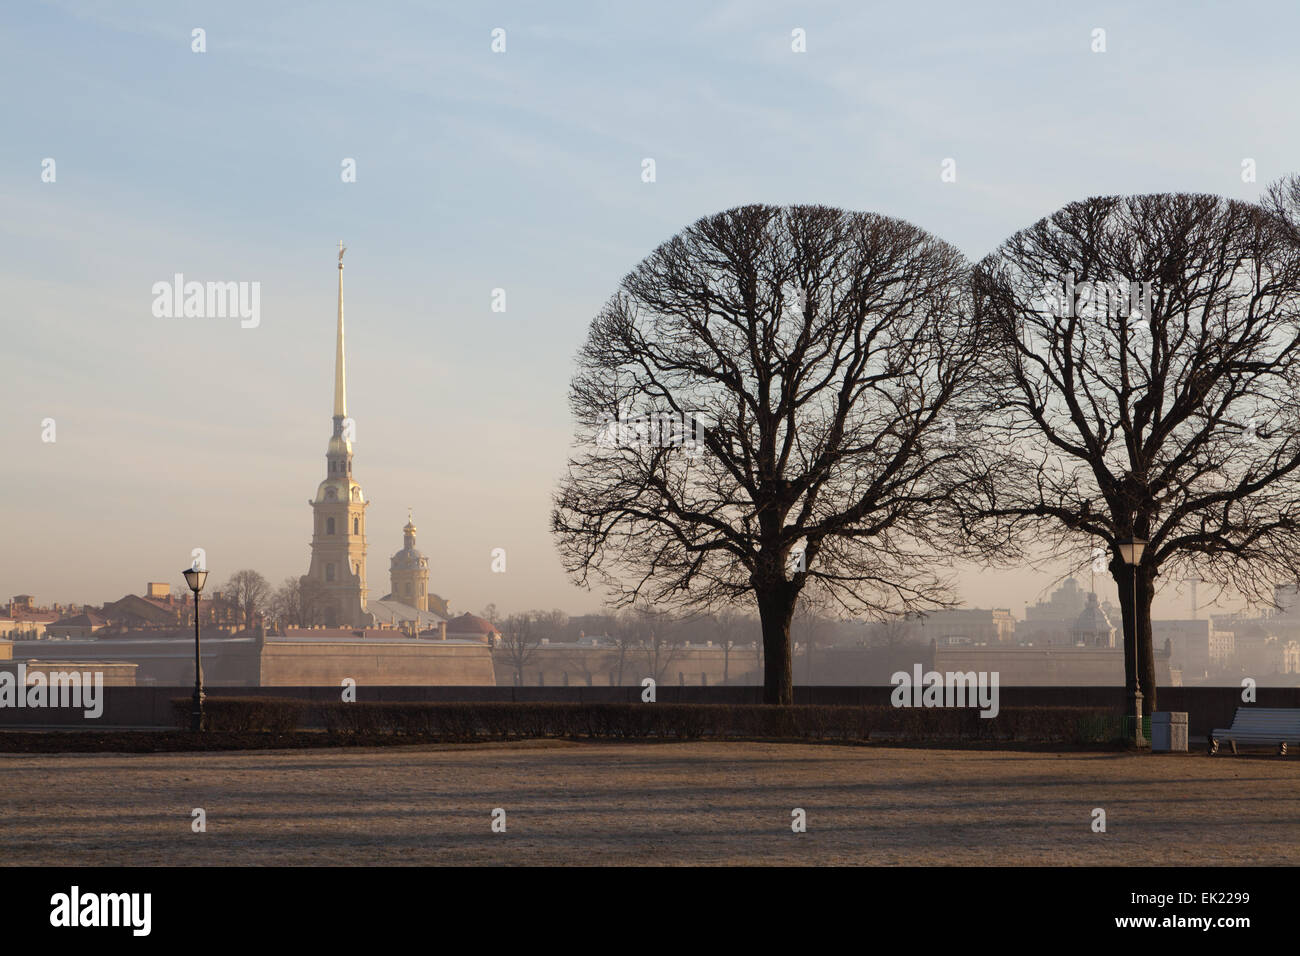 The Peter and Paul Fortress. St. Petersburg, Russia. Stock Photo